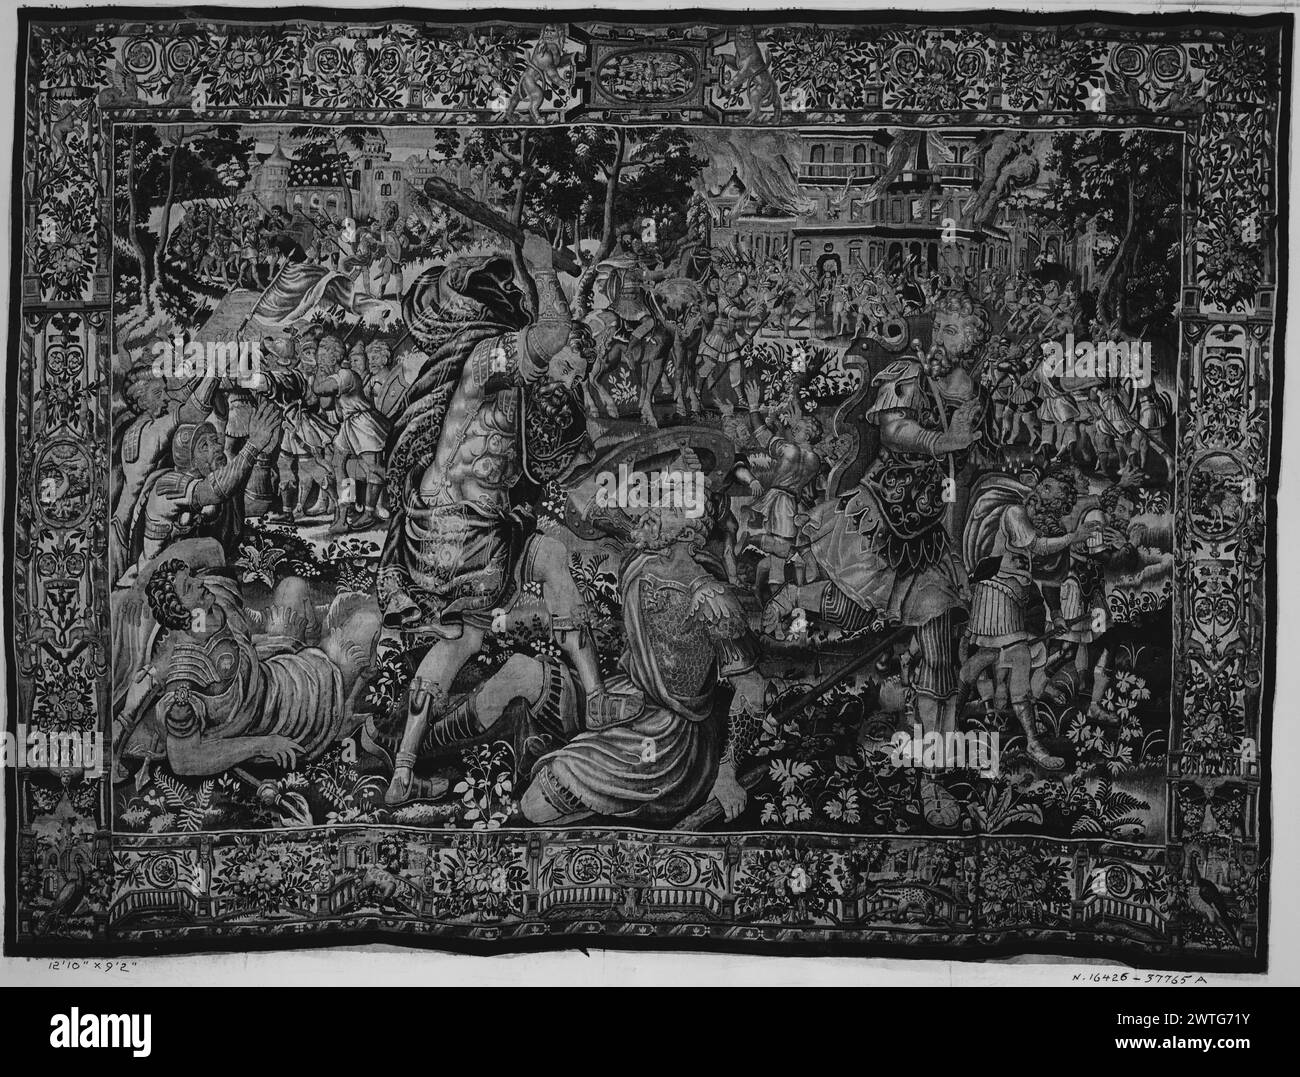 Samson in conflict with Philistines . Guebels, François (Netherlandish (before 1600) - Flanders, act.1545-1577) (workshop, attr.) [weaver] c. 1570-1600 Tapestry Dimensions: H 9'2' x W 12'10' Tapestry Materials/Techniques: unknown Culture: Flemish Weaving Center: Brussels Ownership History: French & Co. purchased from Spanish Art Gallery (L. [Lionel?] Harris), invoiced 8/18/1930; sold to Transglobal Mercantile Export Co. 2/6/1962. Inscriptions: Weaver mark on right guard, bottom In landscape, Samson avenges himself on Philistines & smites them 'hip & thigh with great slaughter' (Judges 15:1-8) Stock Photo